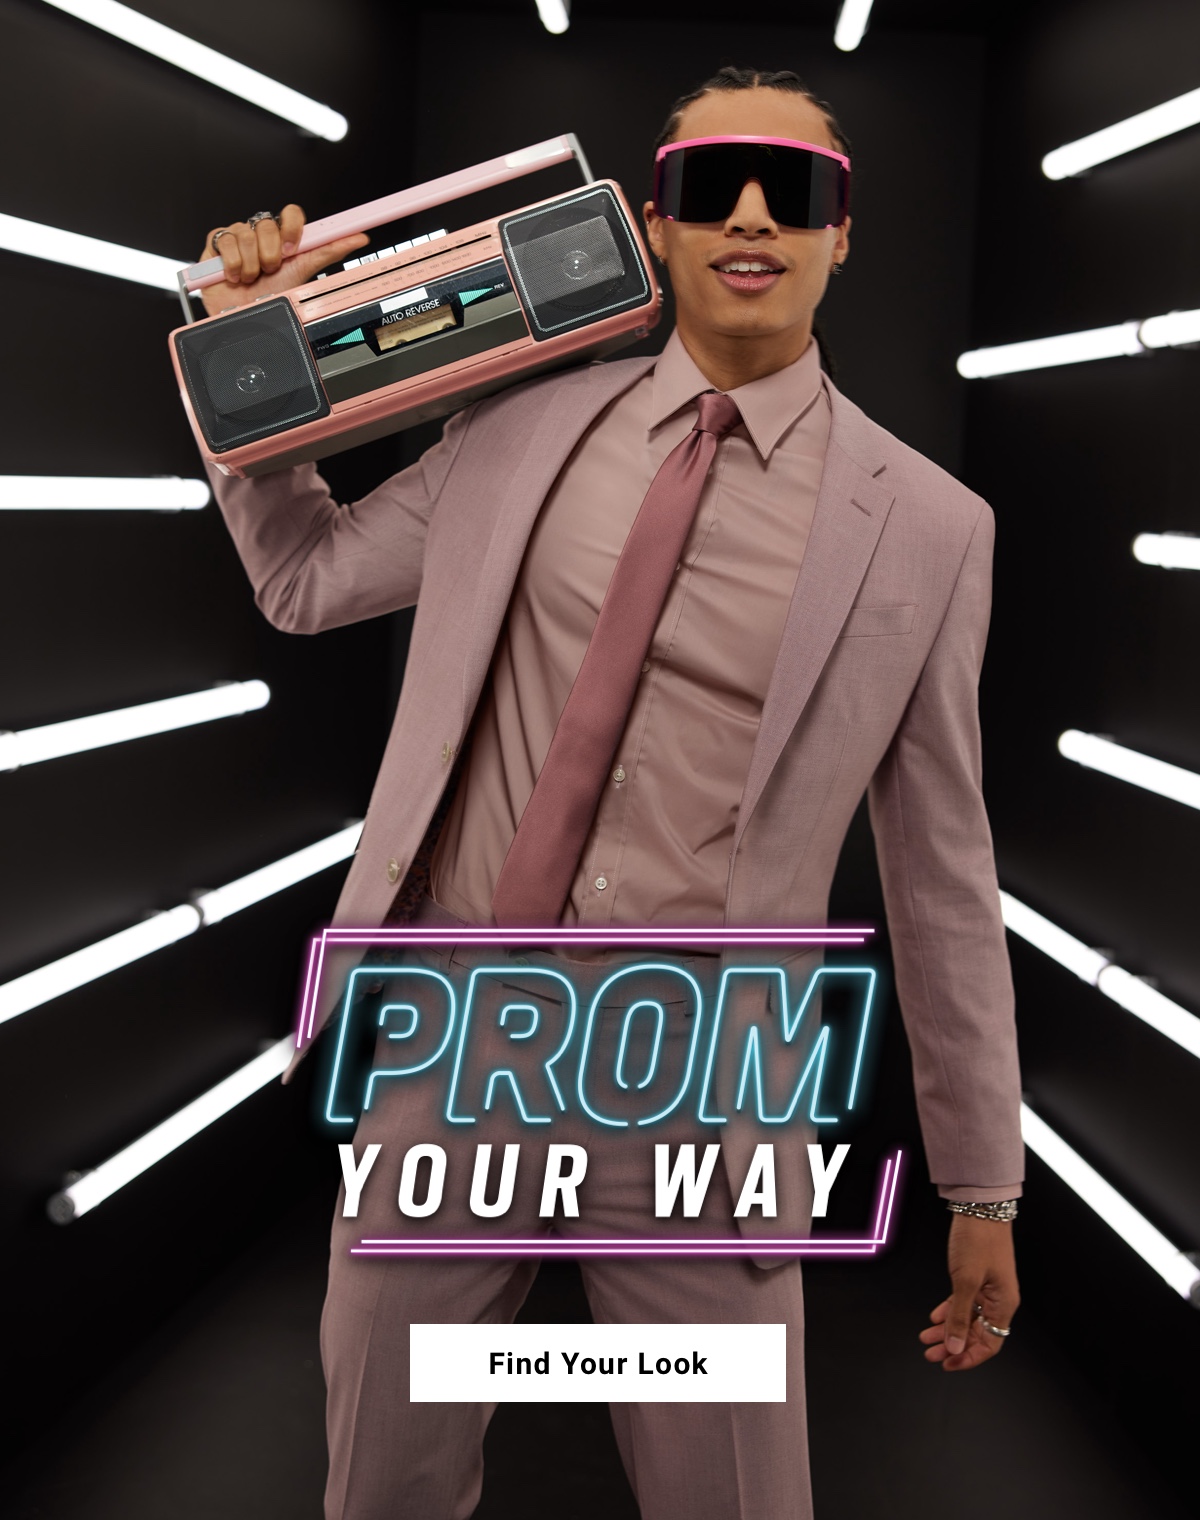 Prom your way